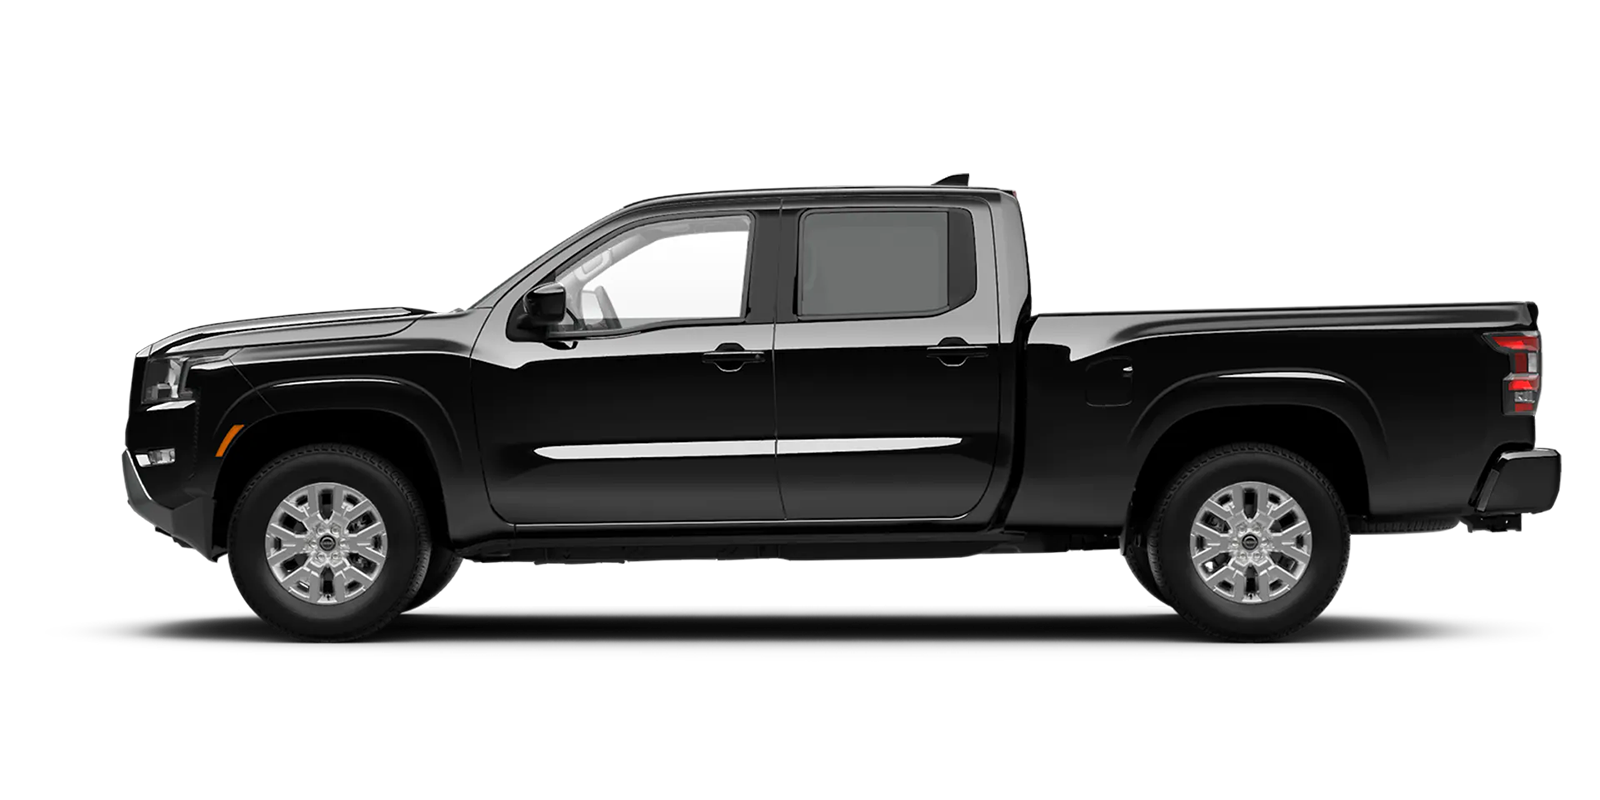 2022 Frontier Crew Cab Long Bed SV 4x4 in Super Black | Romeo Nissan in Kingston NY